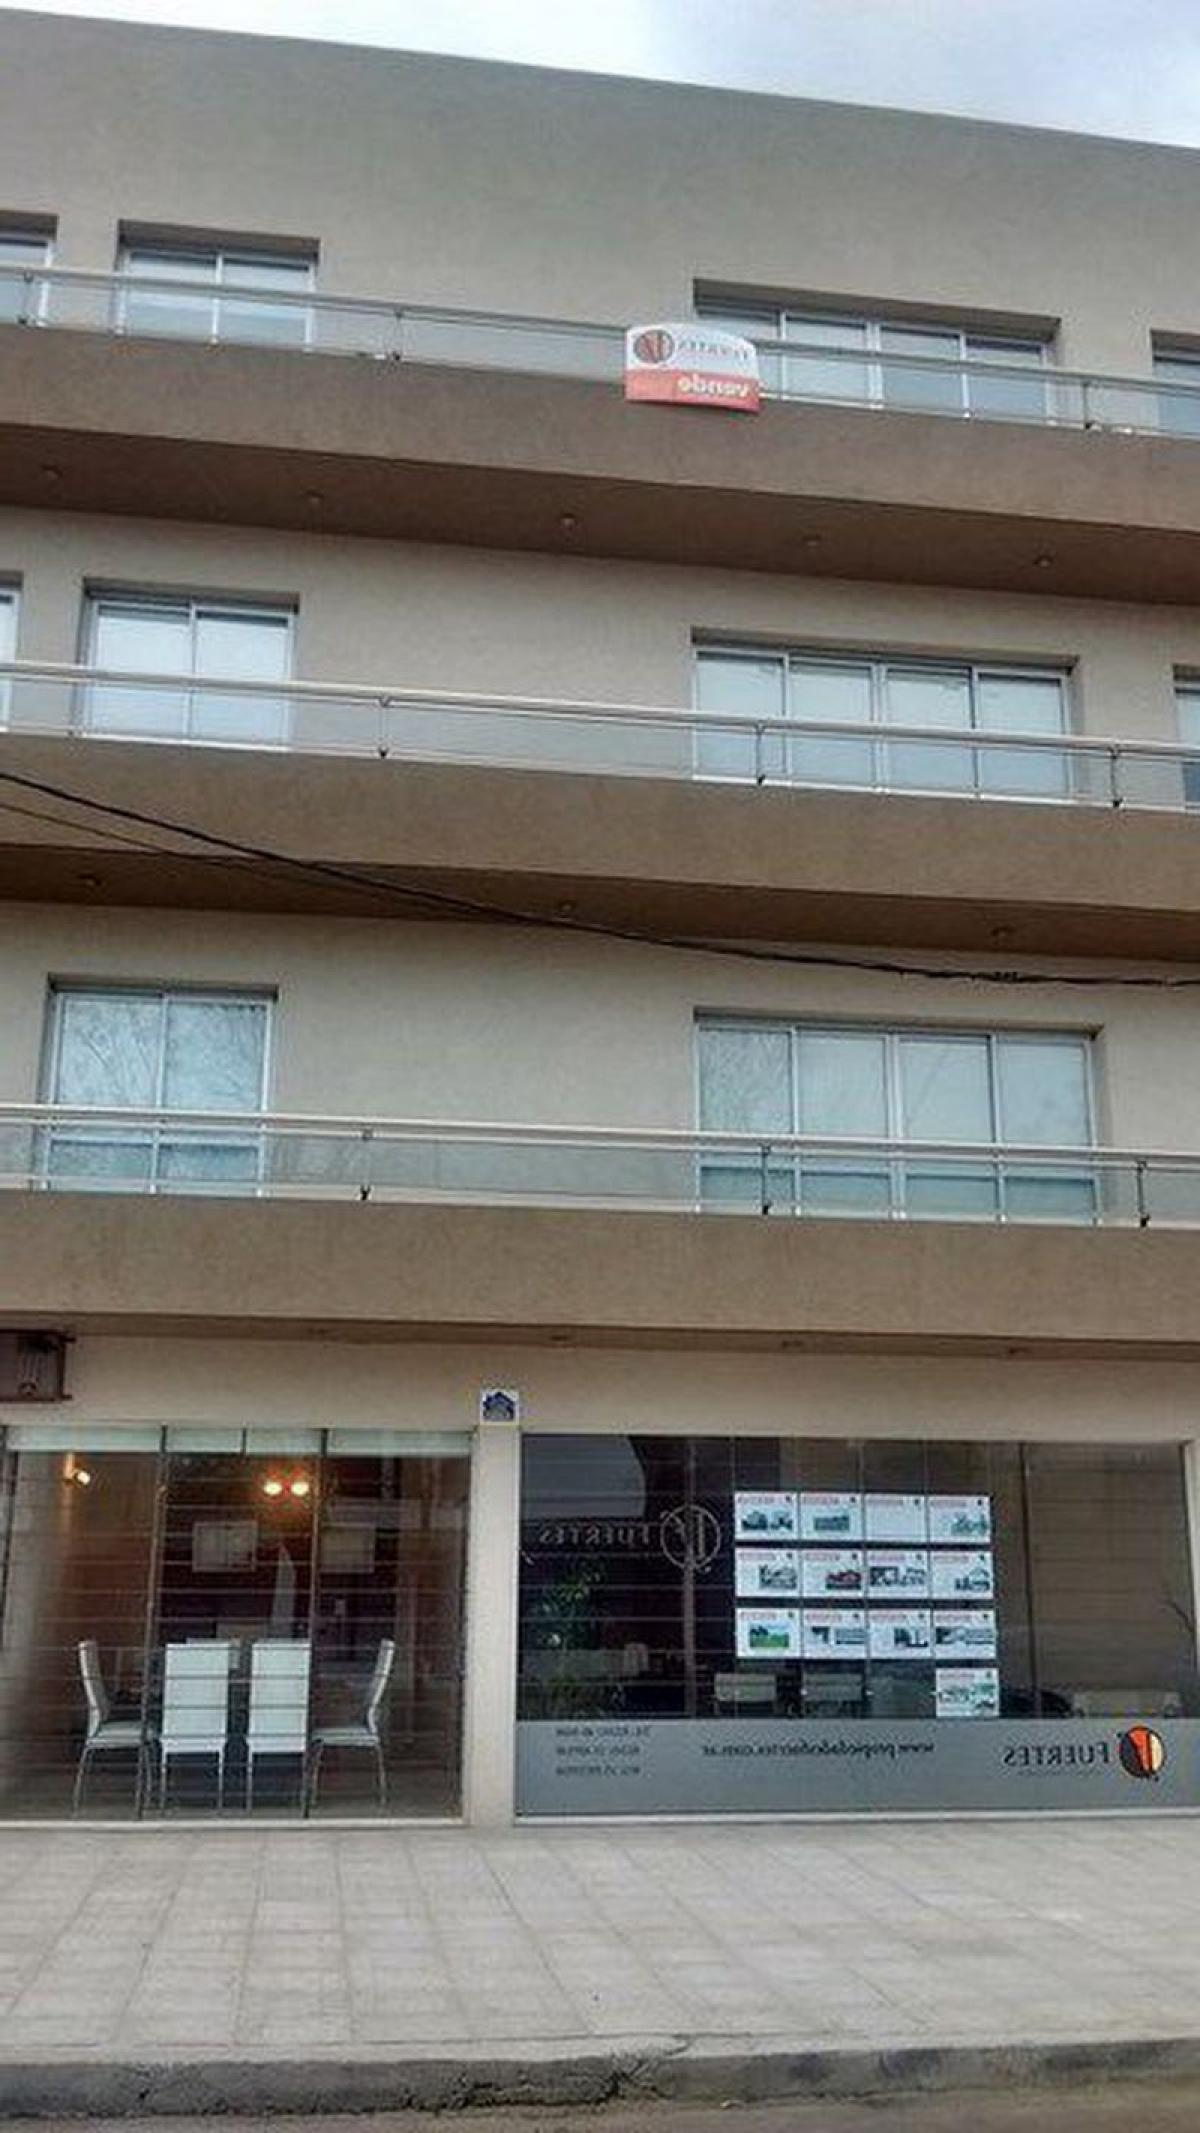 Picture of Apartment For Sale in Chascomus, Buenos Aires, Argentina